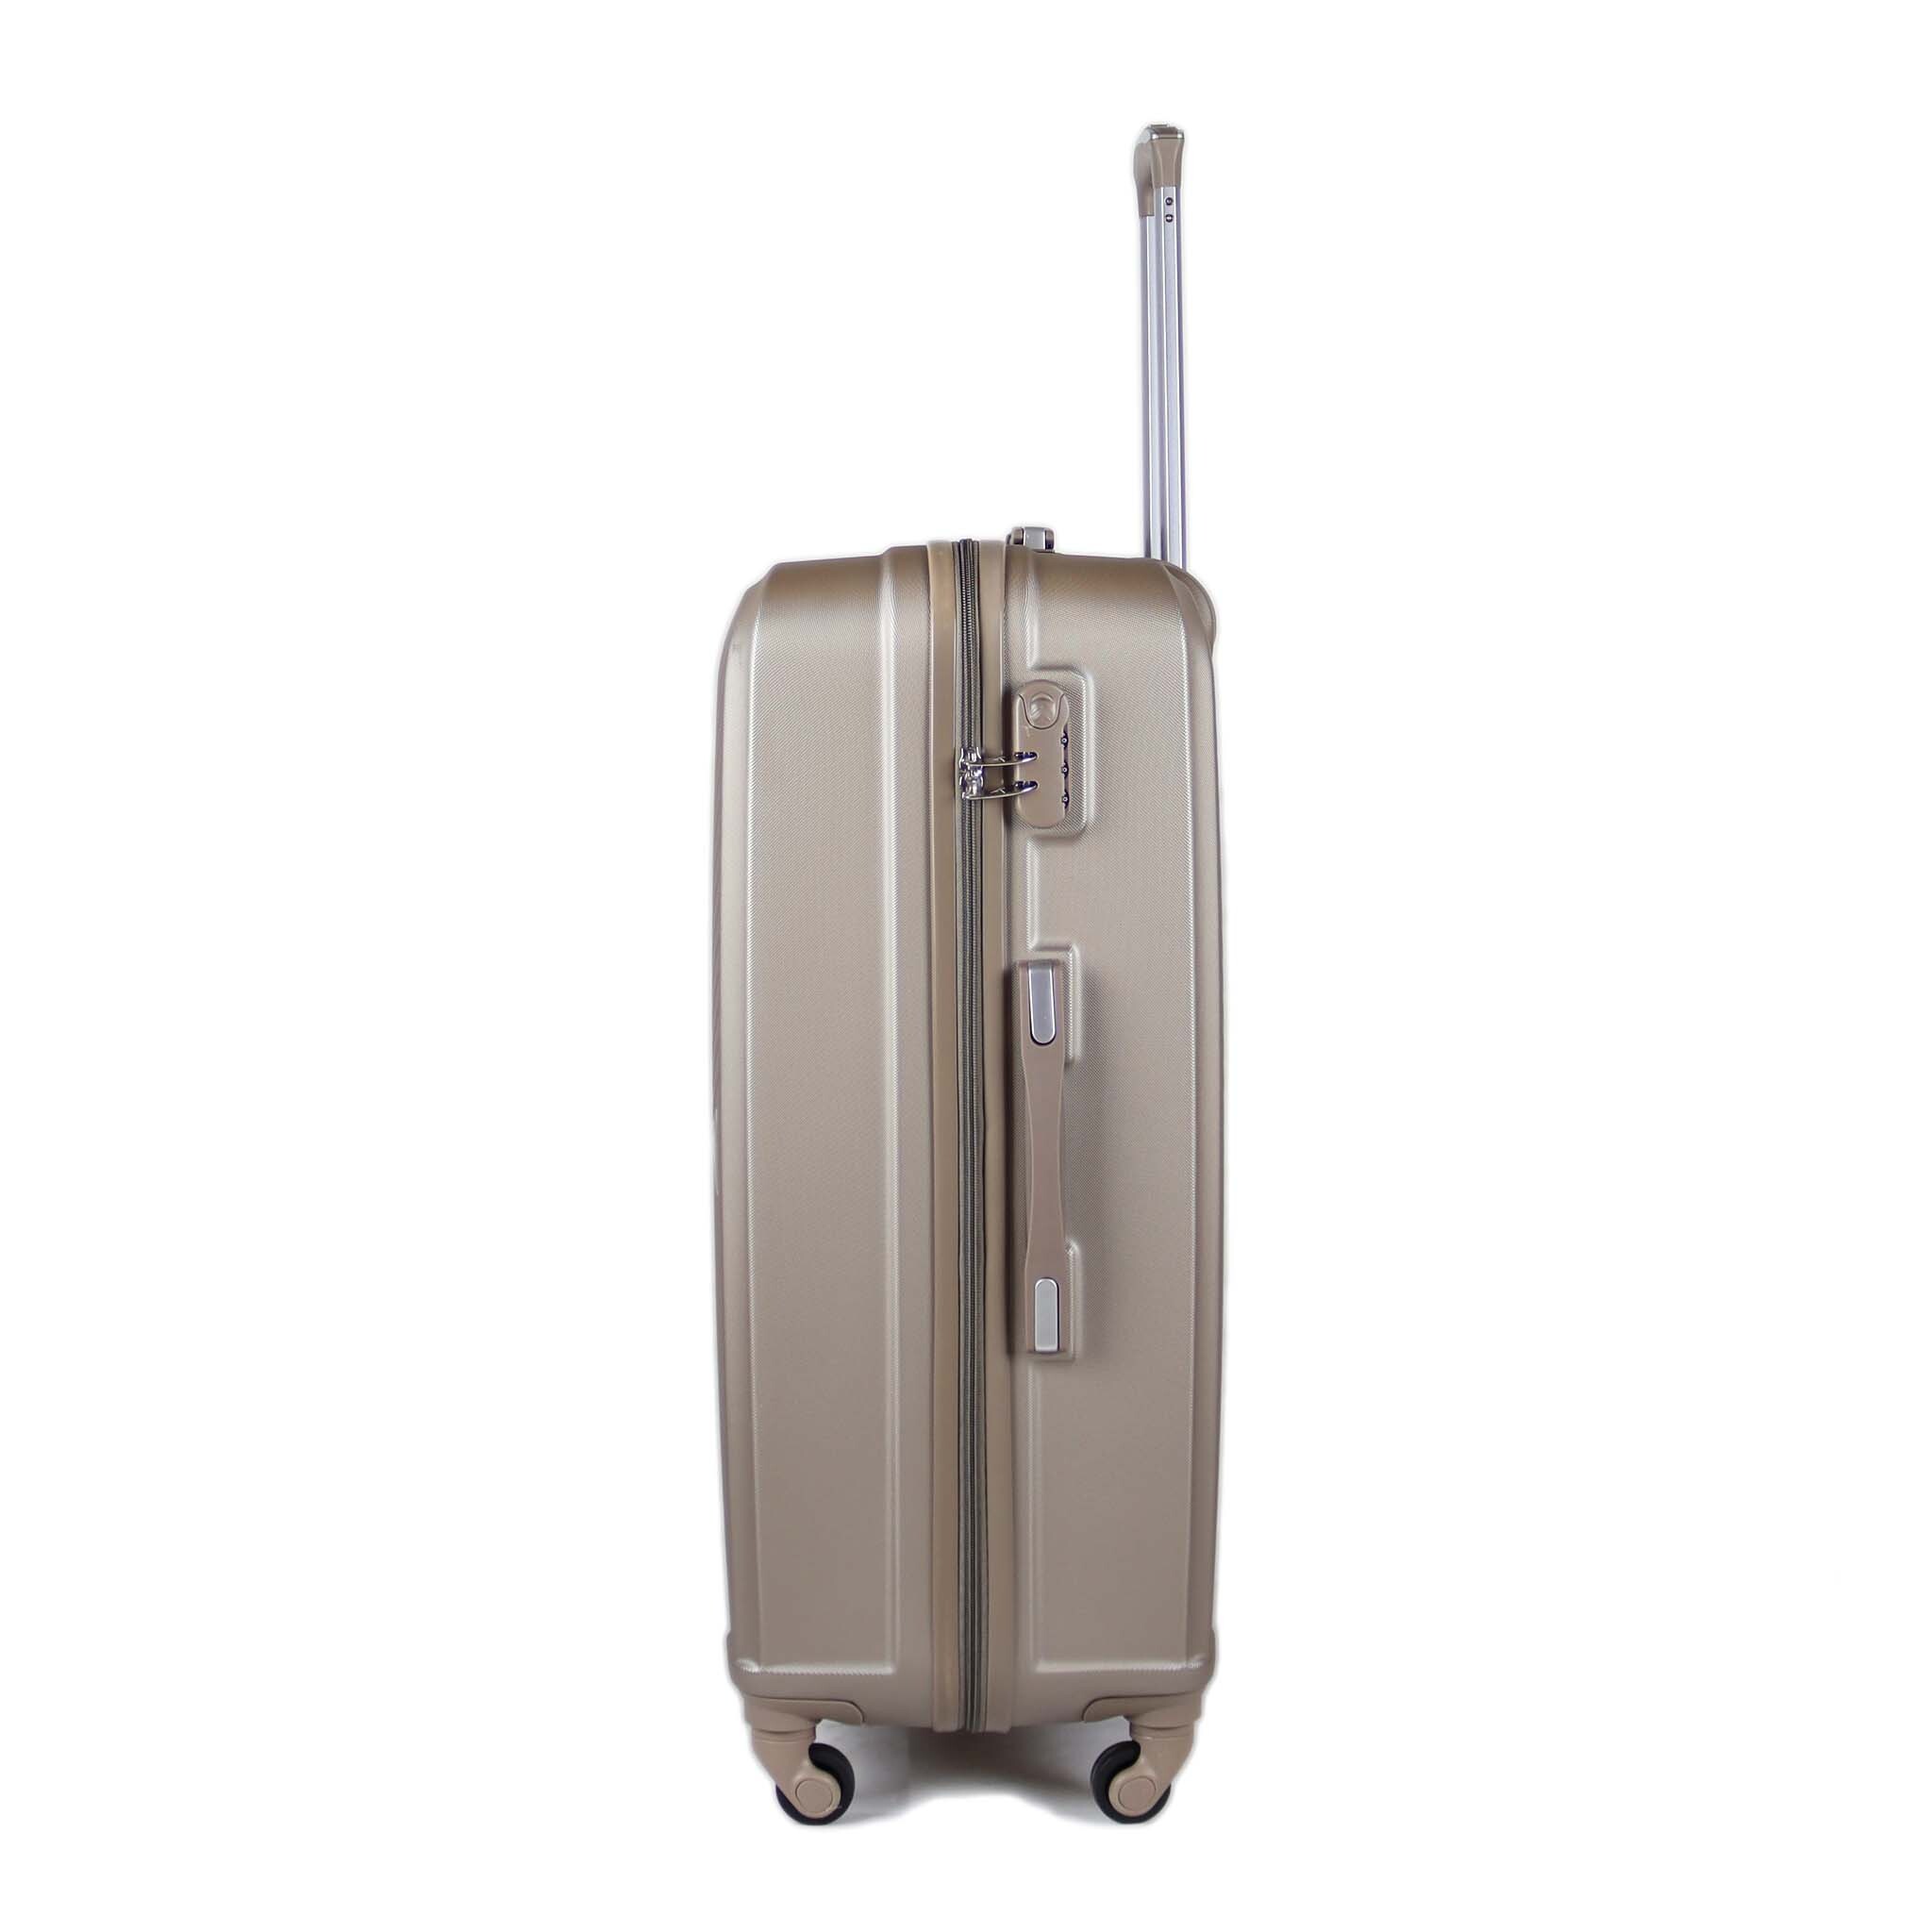 SKY BIRD ELEGANT ABS LUGGAGE TROLLEY CARRY-ON SMALL BAG 20INCH, CHAMPAGNE